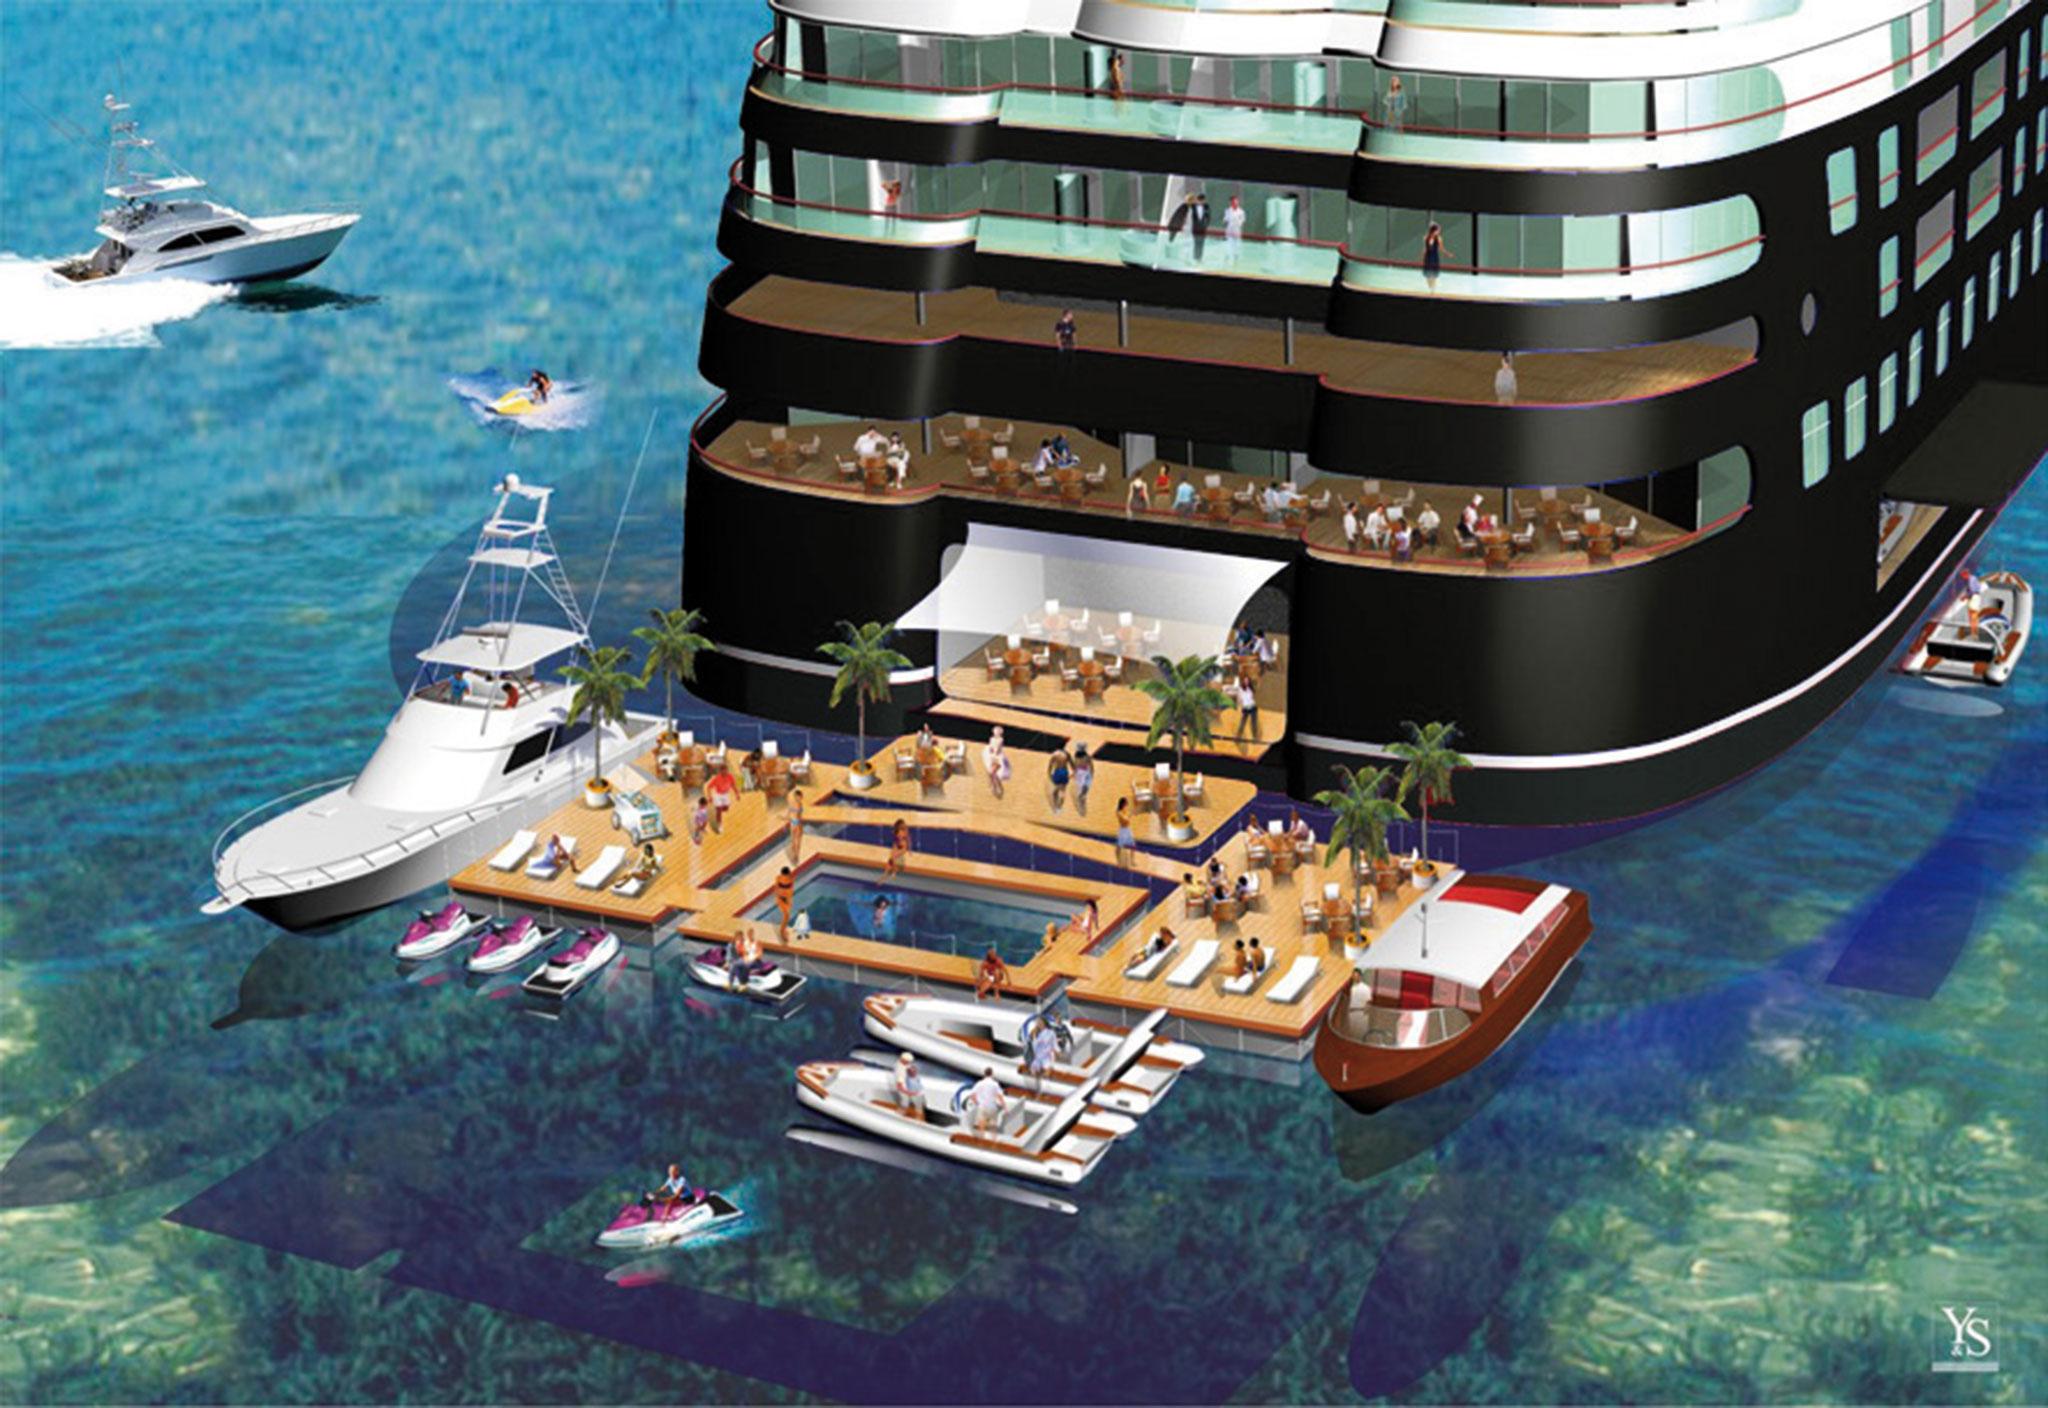 The £250m boat aims to be a 'floating private members club' (Quintessentially)